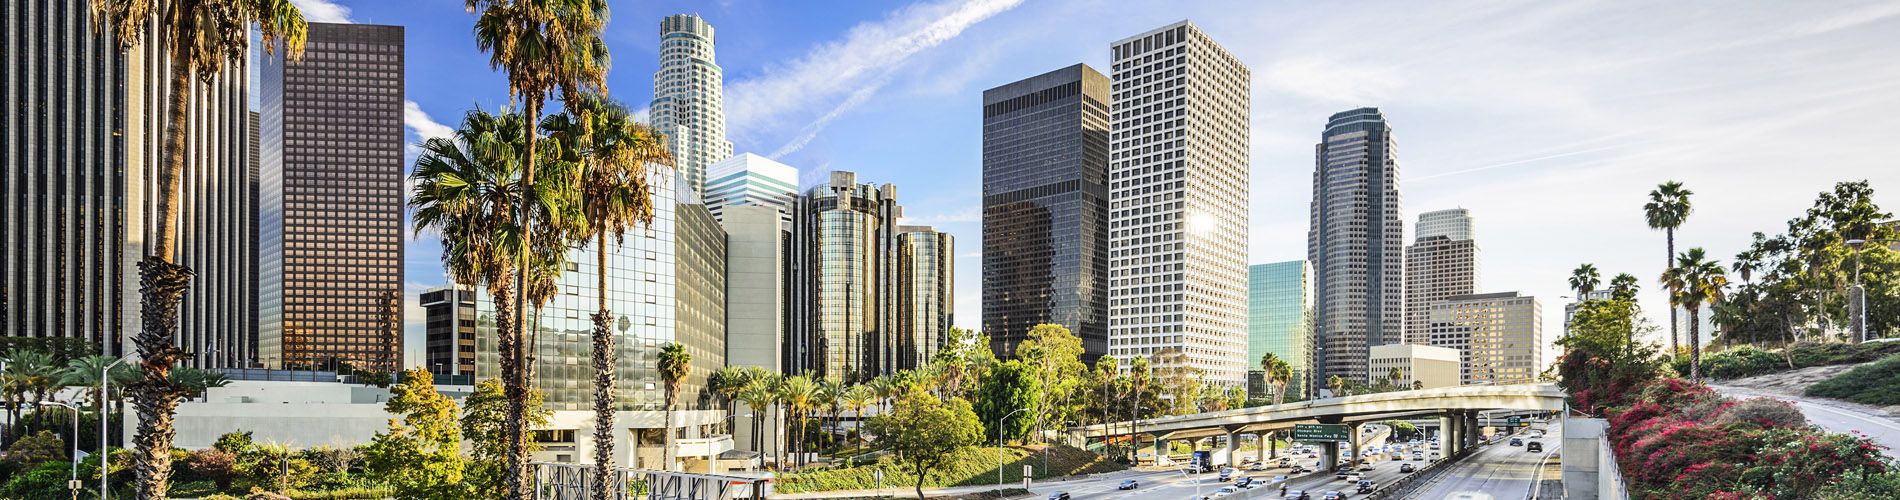 A skyline image of Downtown Los Angeles.